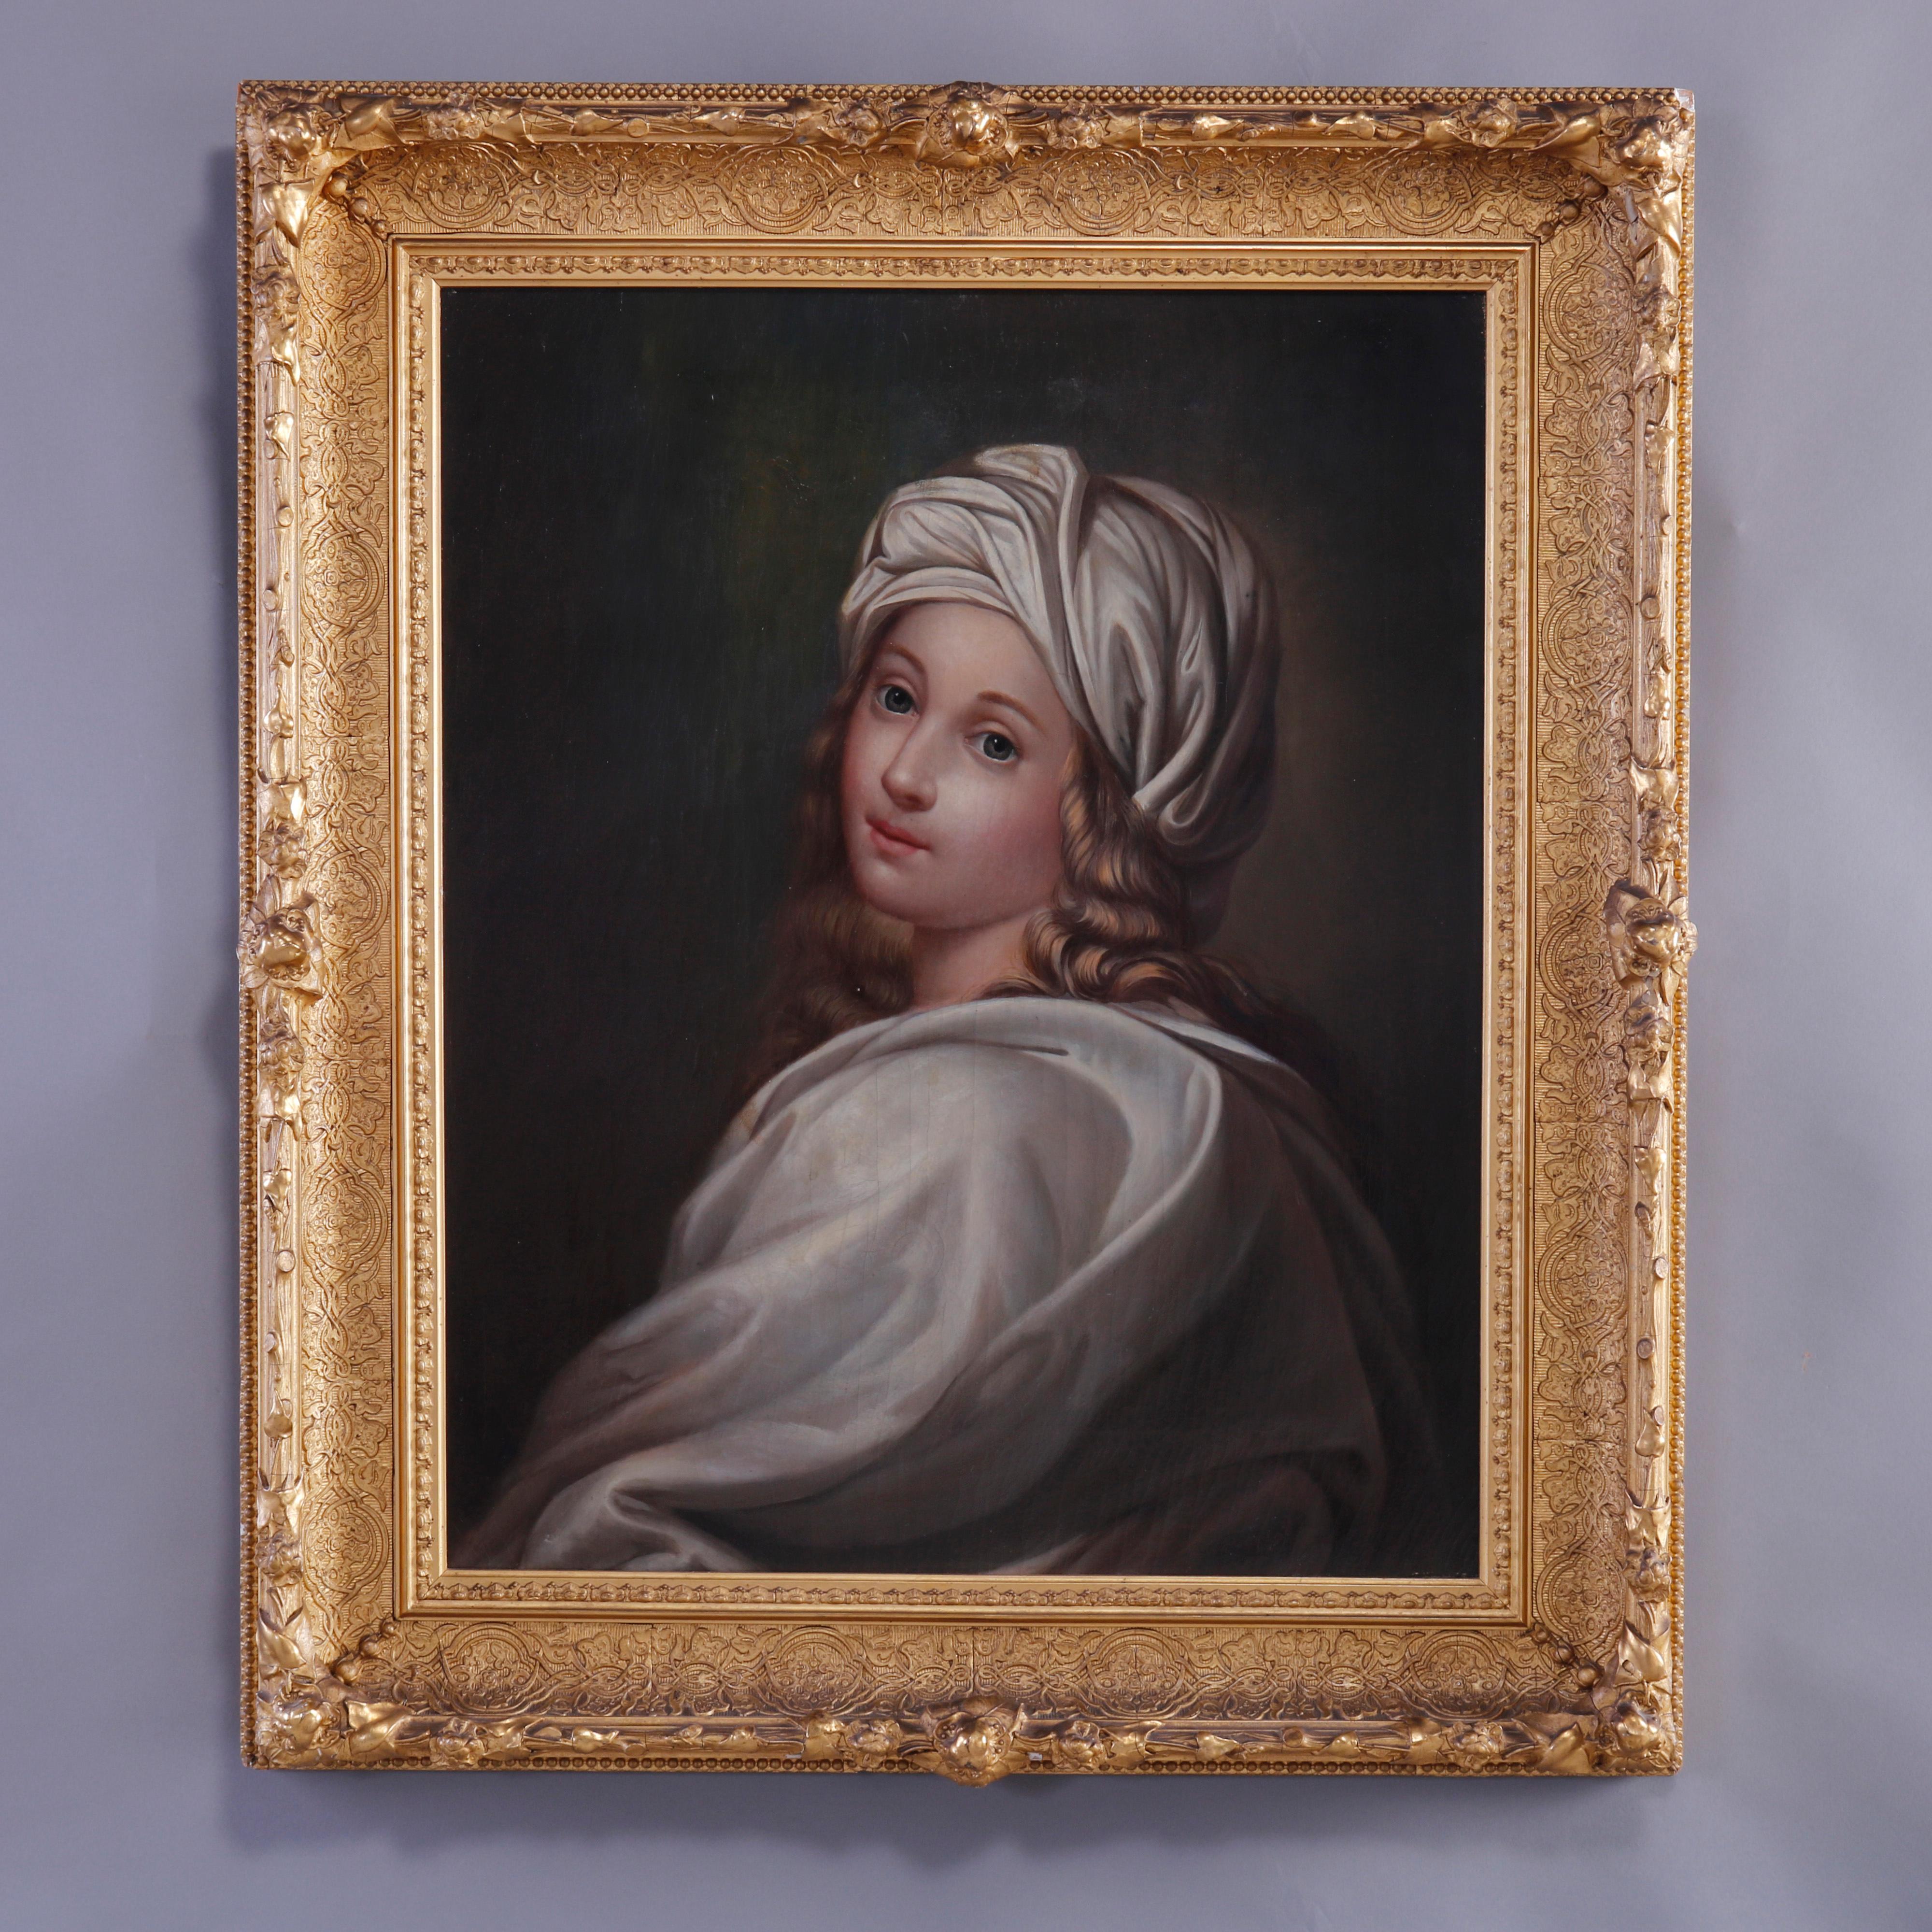 An antique painting offers oil on canvas of Girl in White Turban old master copy, artist unknown, seated in giltwood frame, 19th century

Measures - 35''h x 30''w x 3''d; sight 26.5